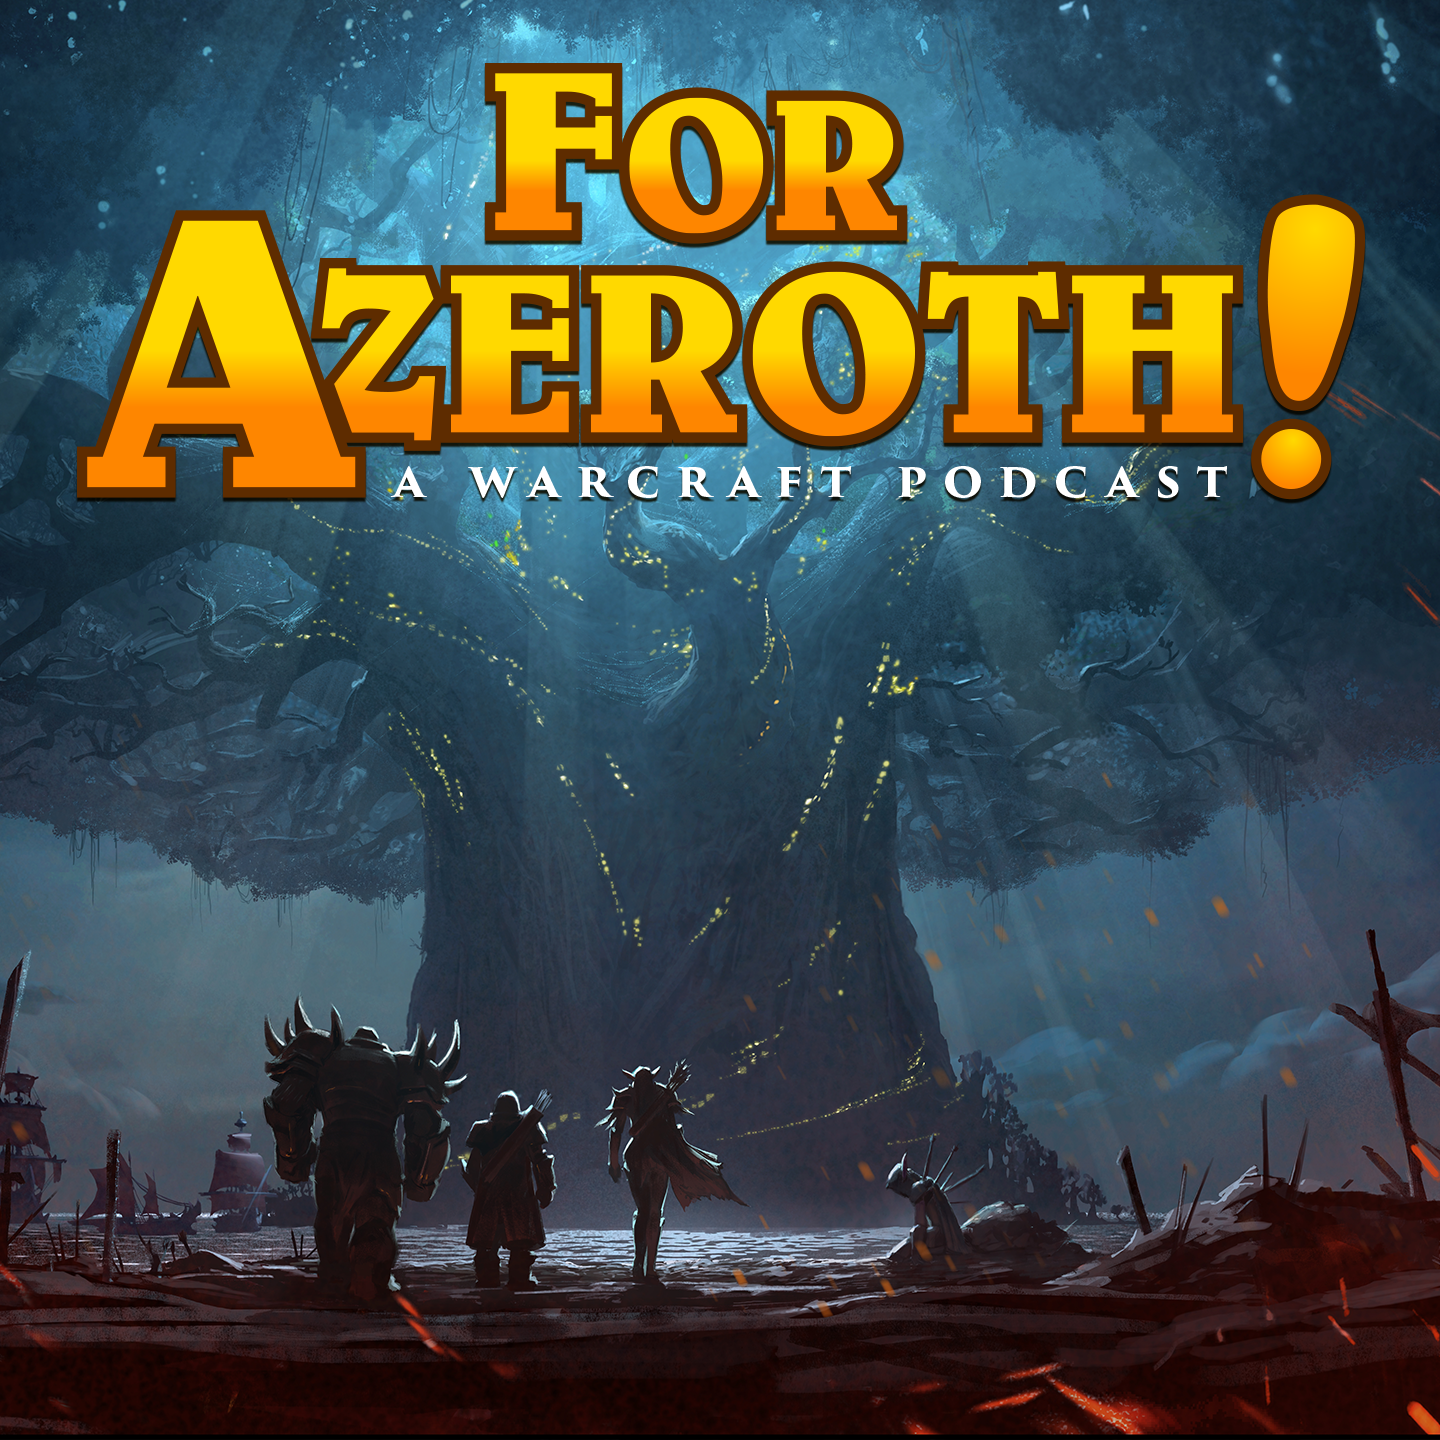 #94 - For Azeroth!: “Army of Azeroth Incoming?”